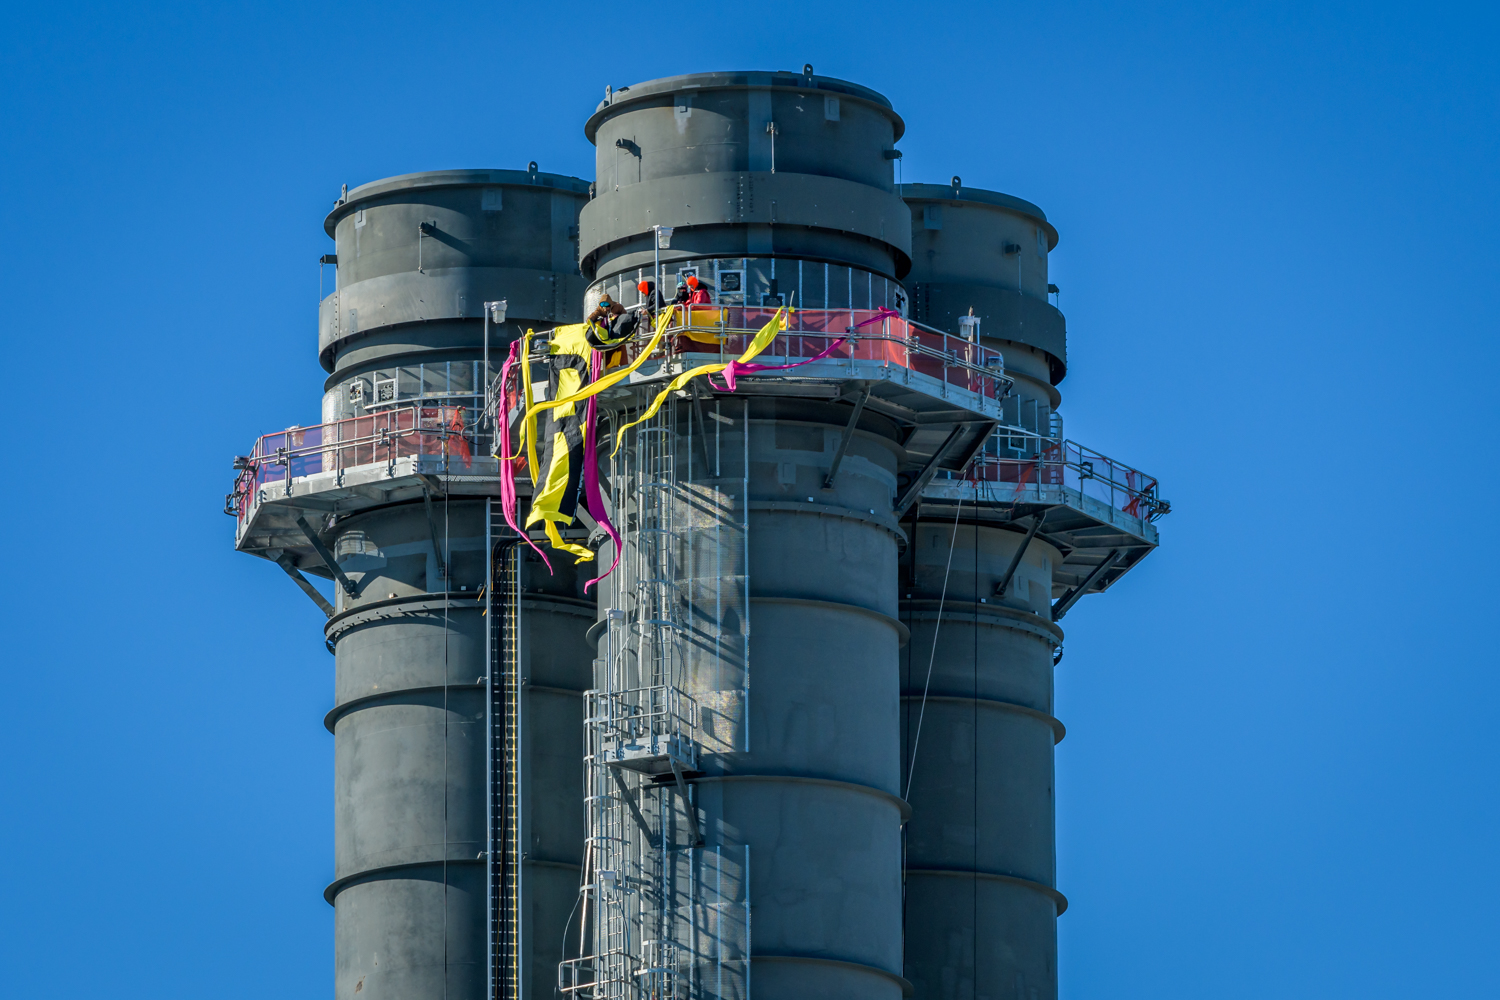 Four protesters, including two local farmers, climbed a smokestack to unfurl banners